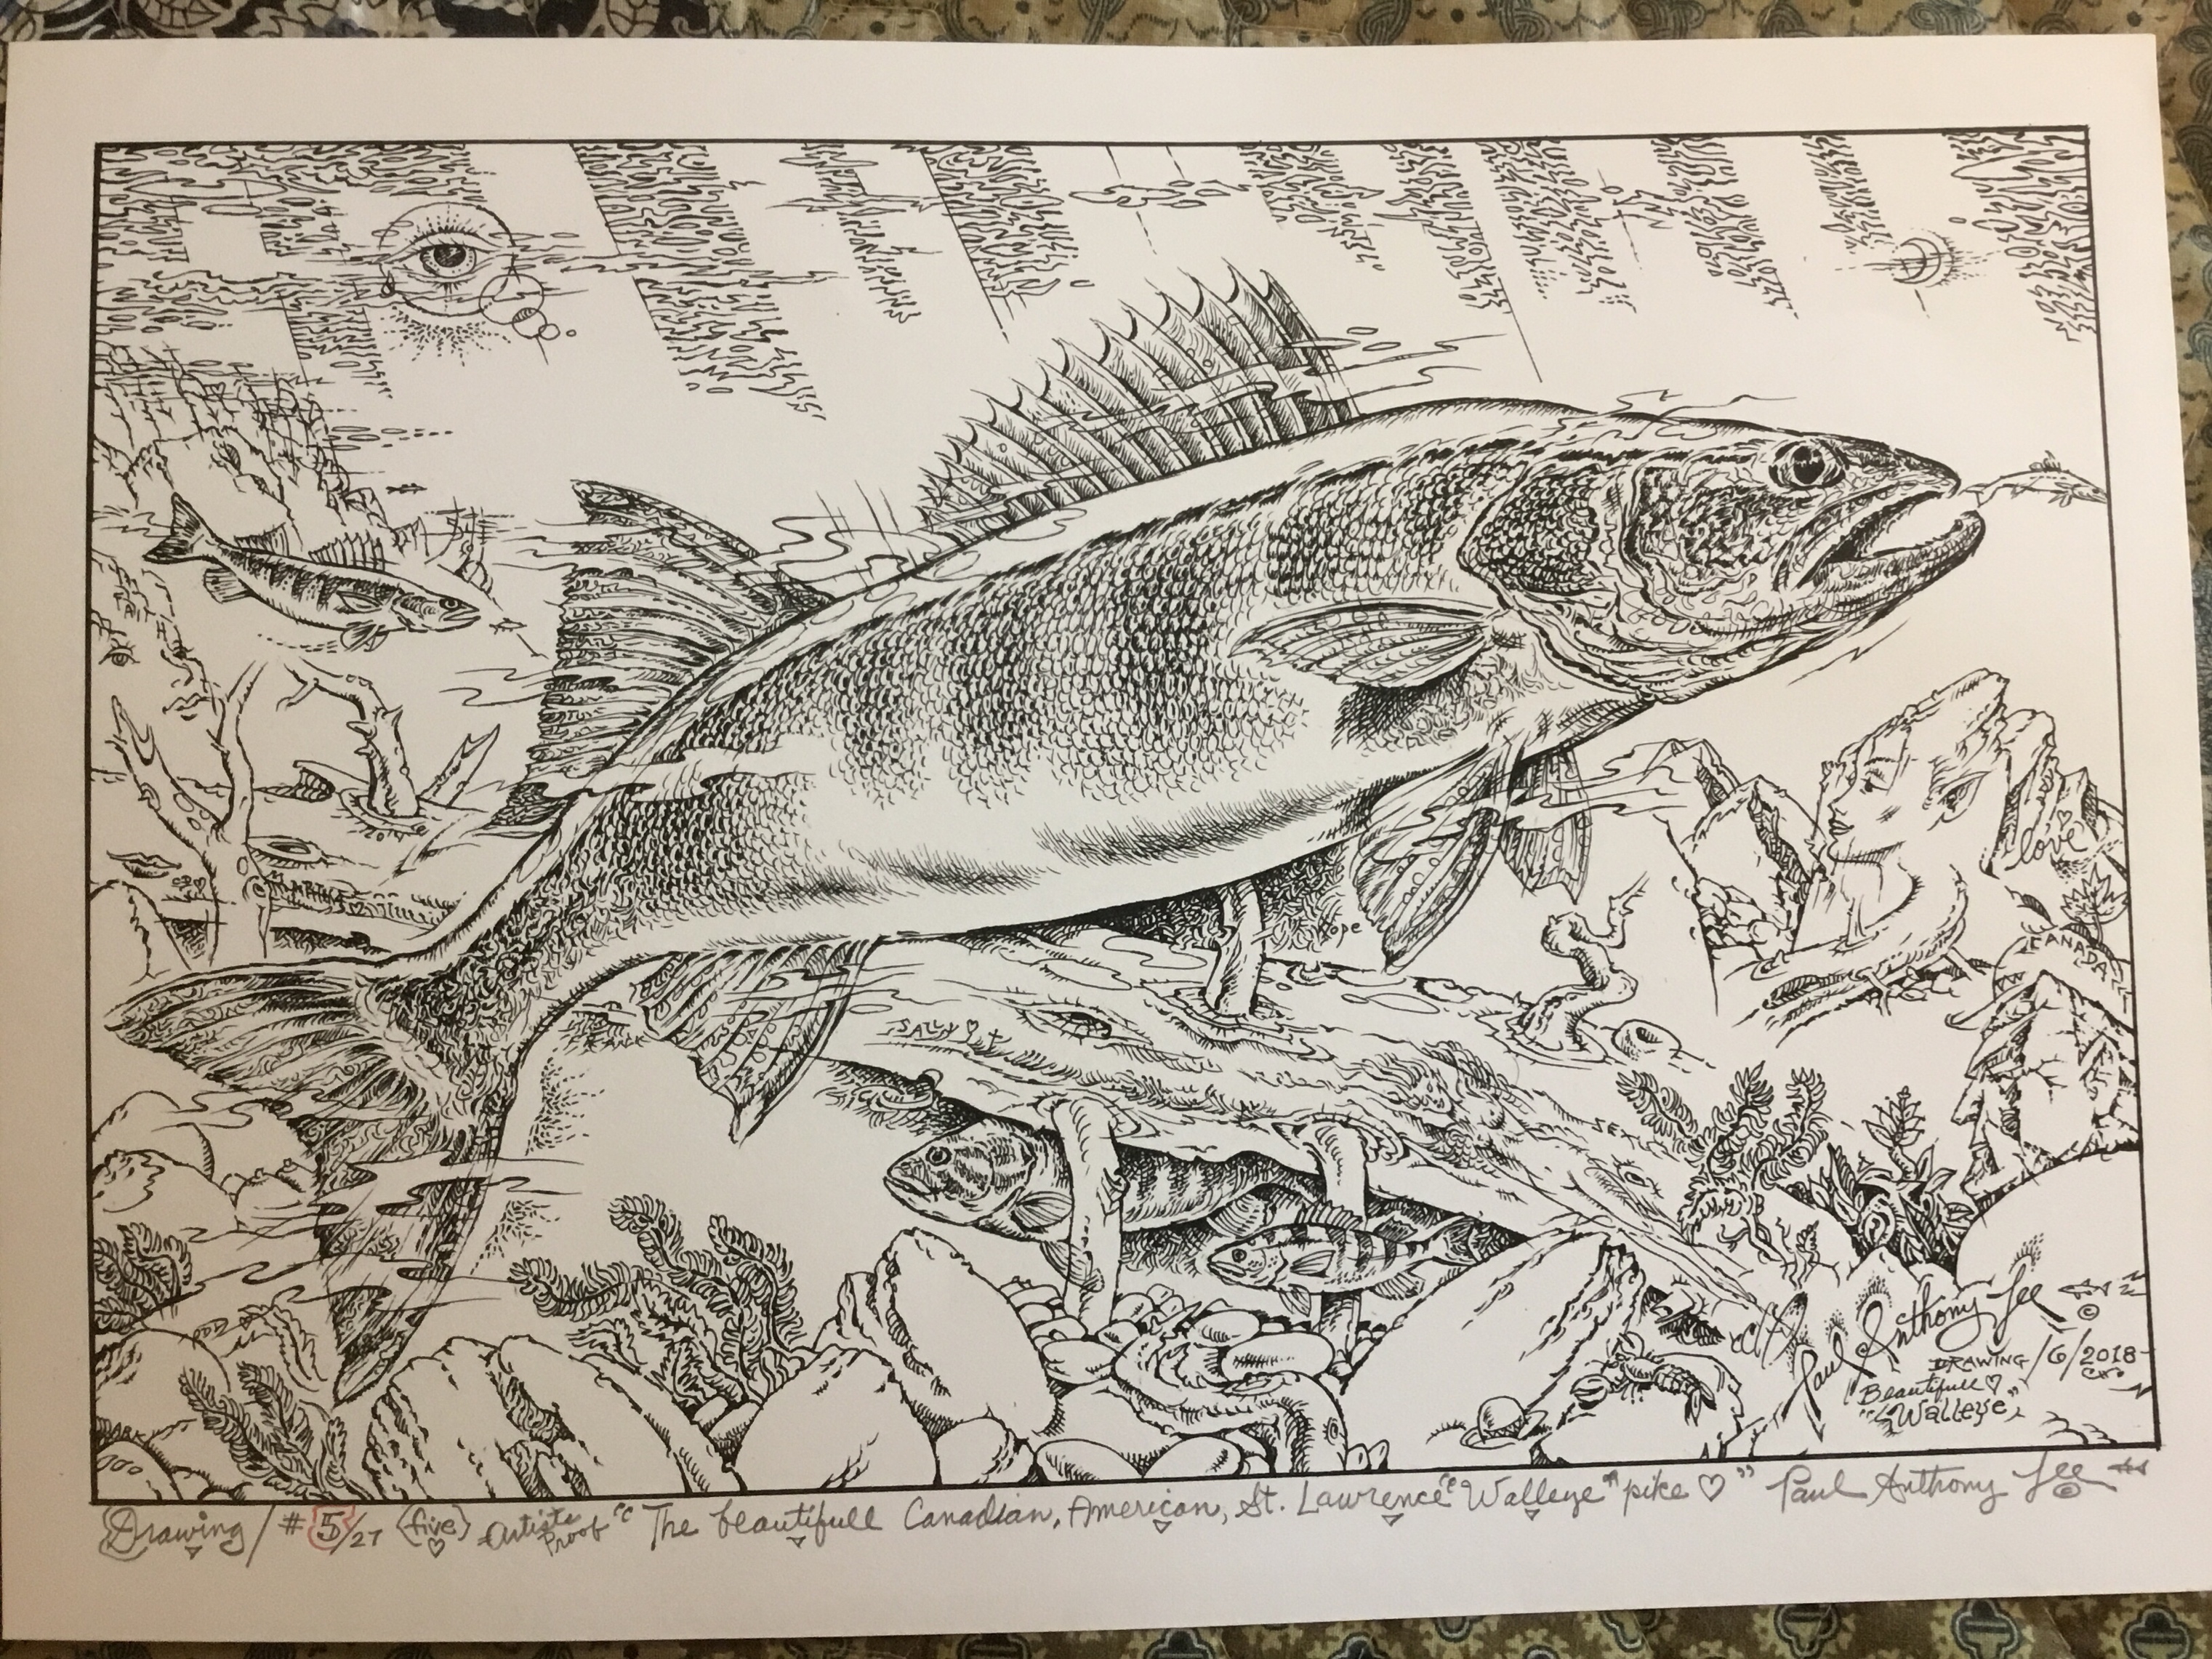 Walleye Drawing - Classifieds - Buy, Sell, Trade or Rent - Lake Ontario  United - Lake Ontario's Largest Fishing & Hunting Community - New York and  Ontario Canada